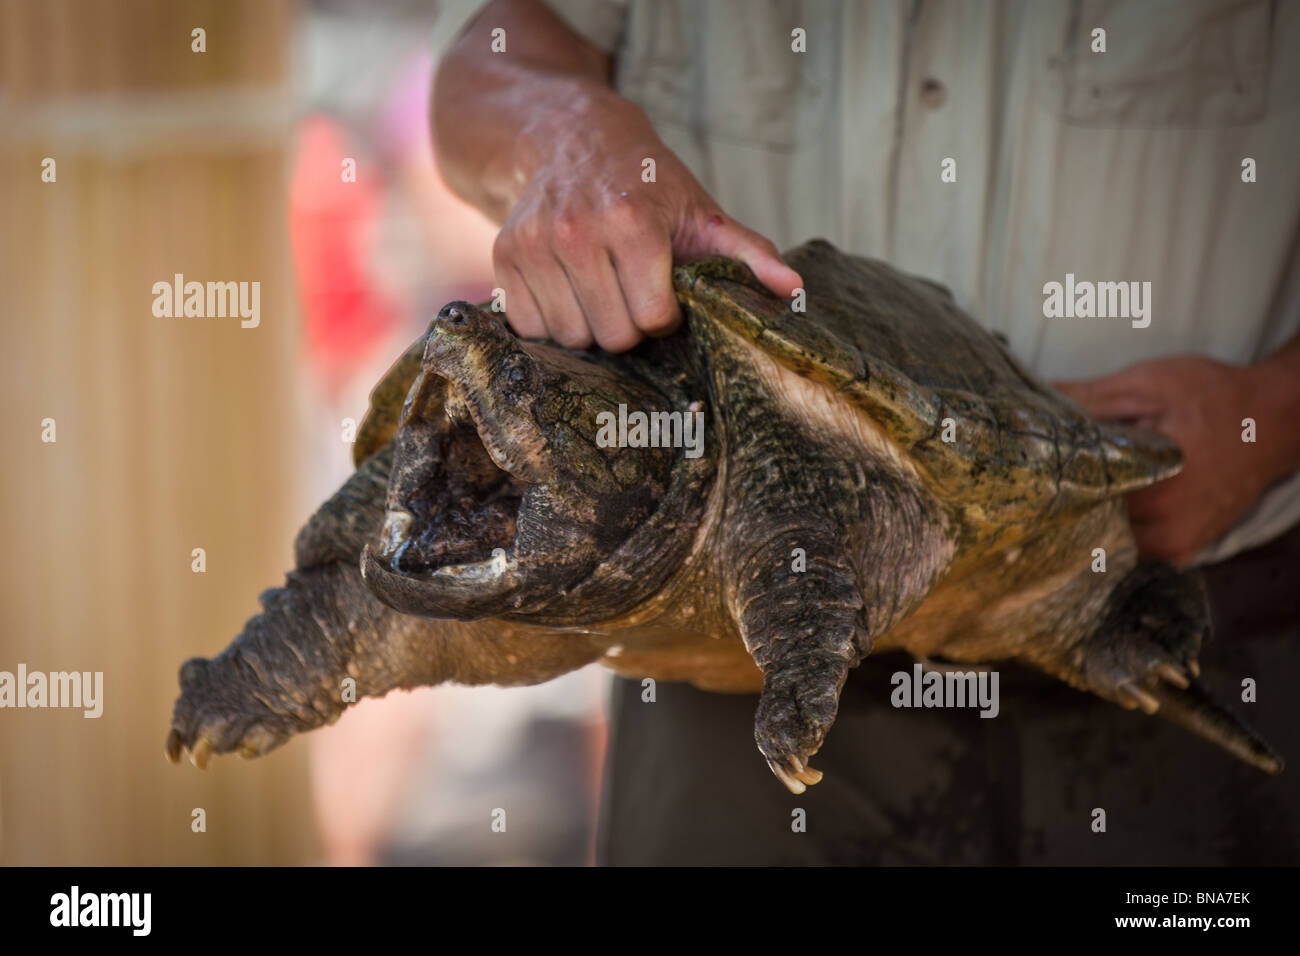 Alligator Snapping Turtle (Macrochelys temminckii) is one of the largest freshwater turtles in the world in Myrtle Beach, SC. Stock Photo